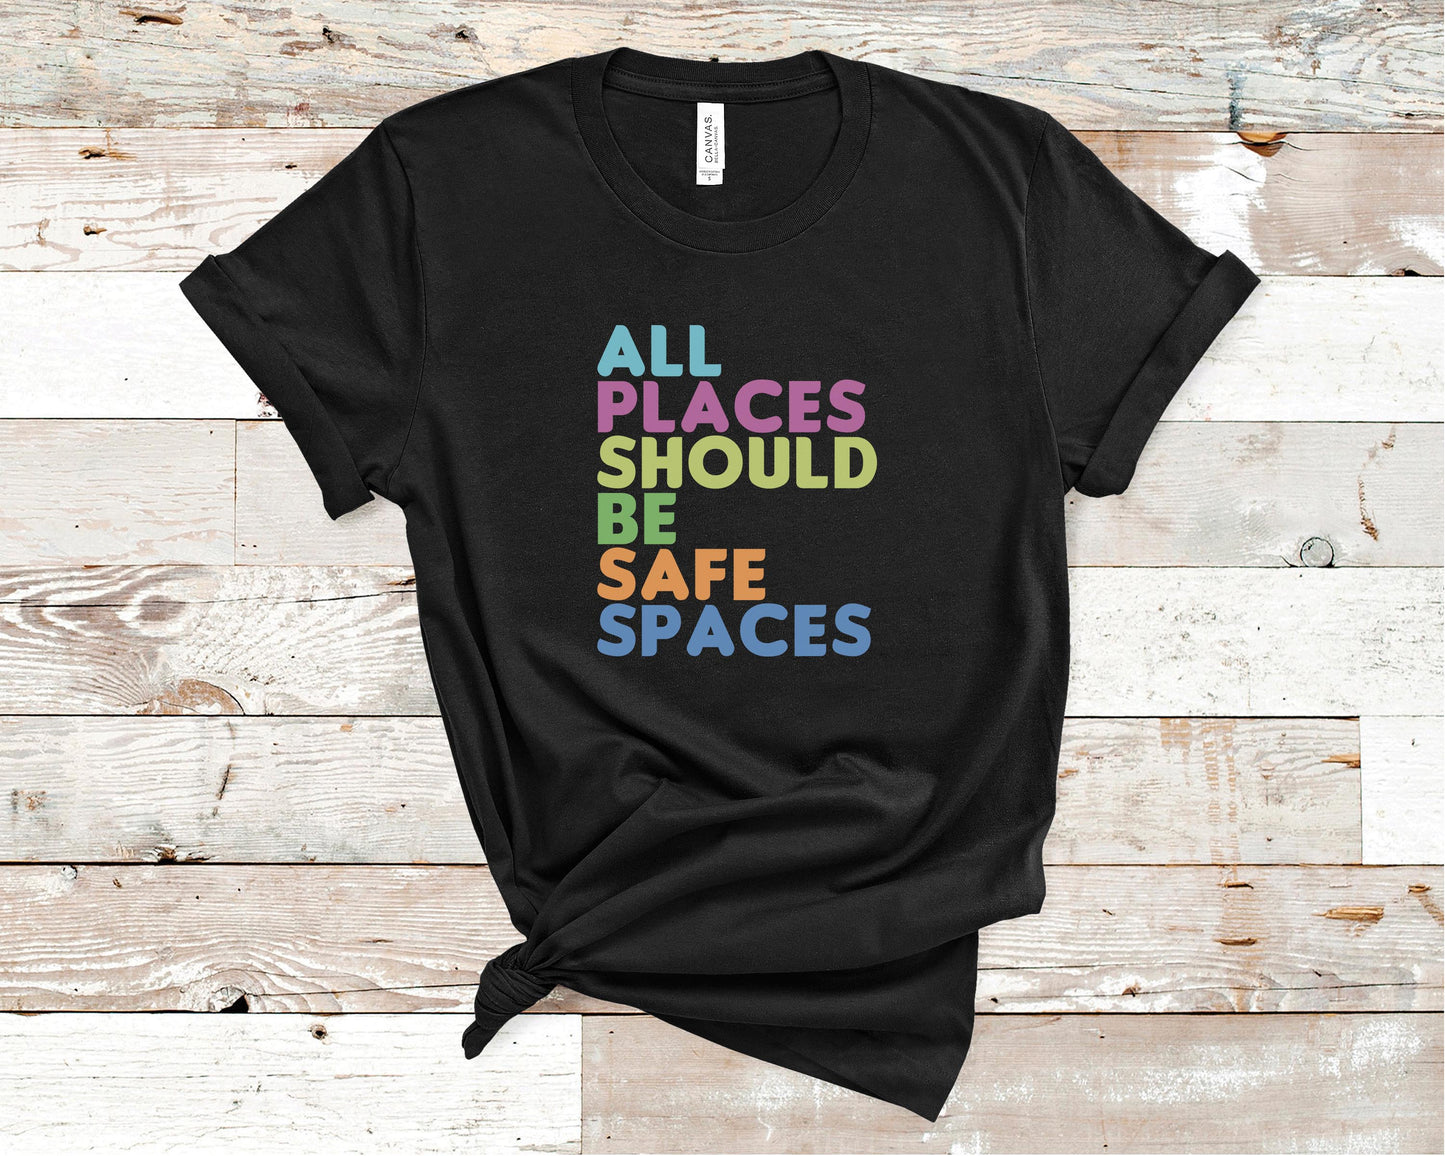 All Places Should Be Safe Spaces - LGBTQ